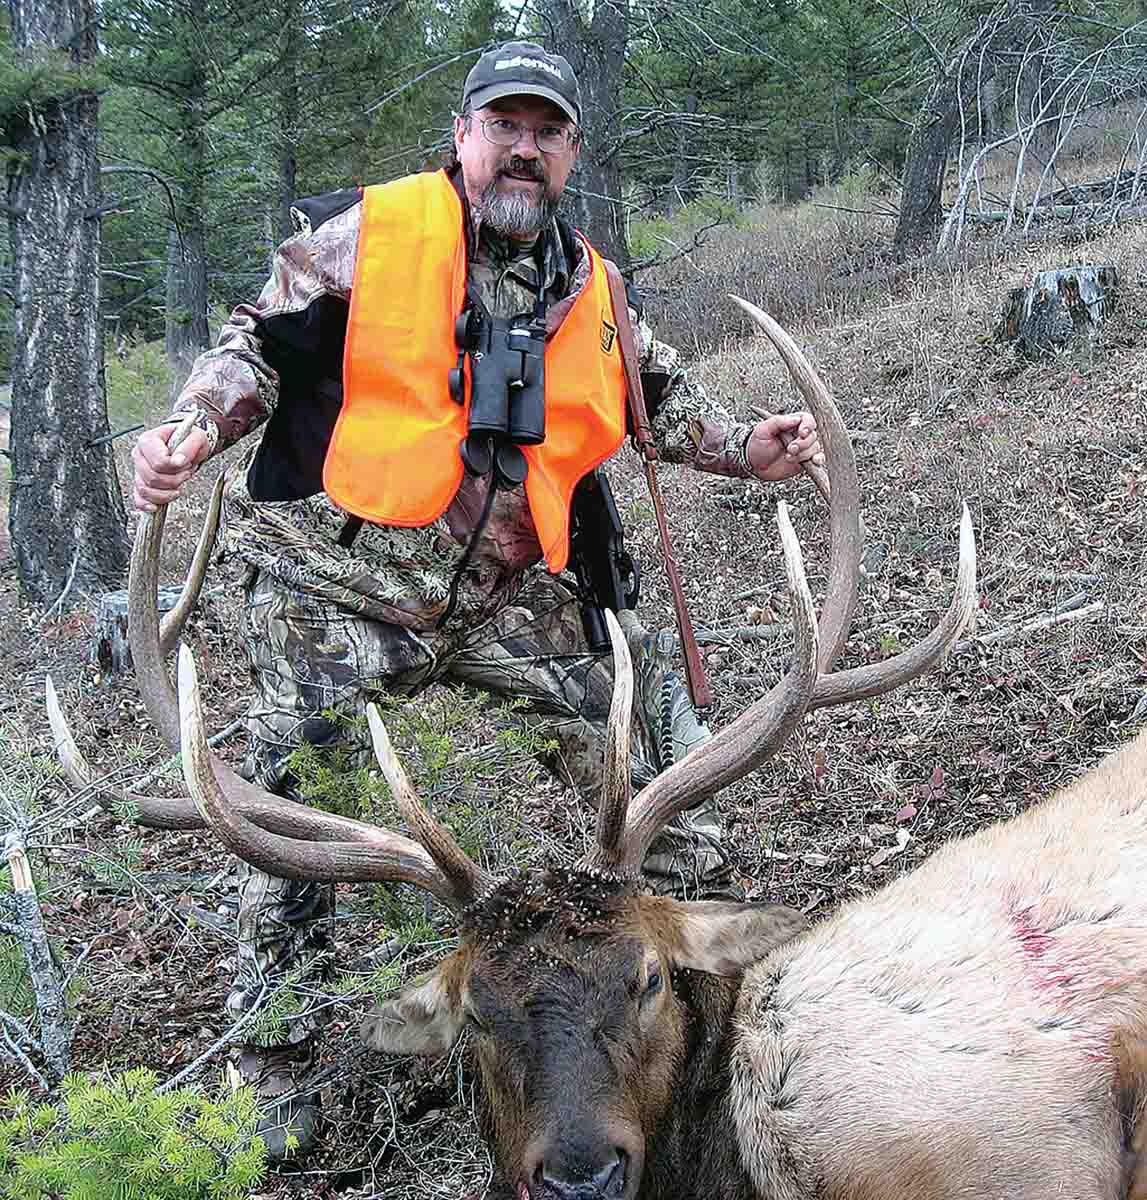 John’s best elk was taken with a .30-06 and a 180-grain Tipped Trophy Bonded bullet; the bull went about 20 feet before falling.